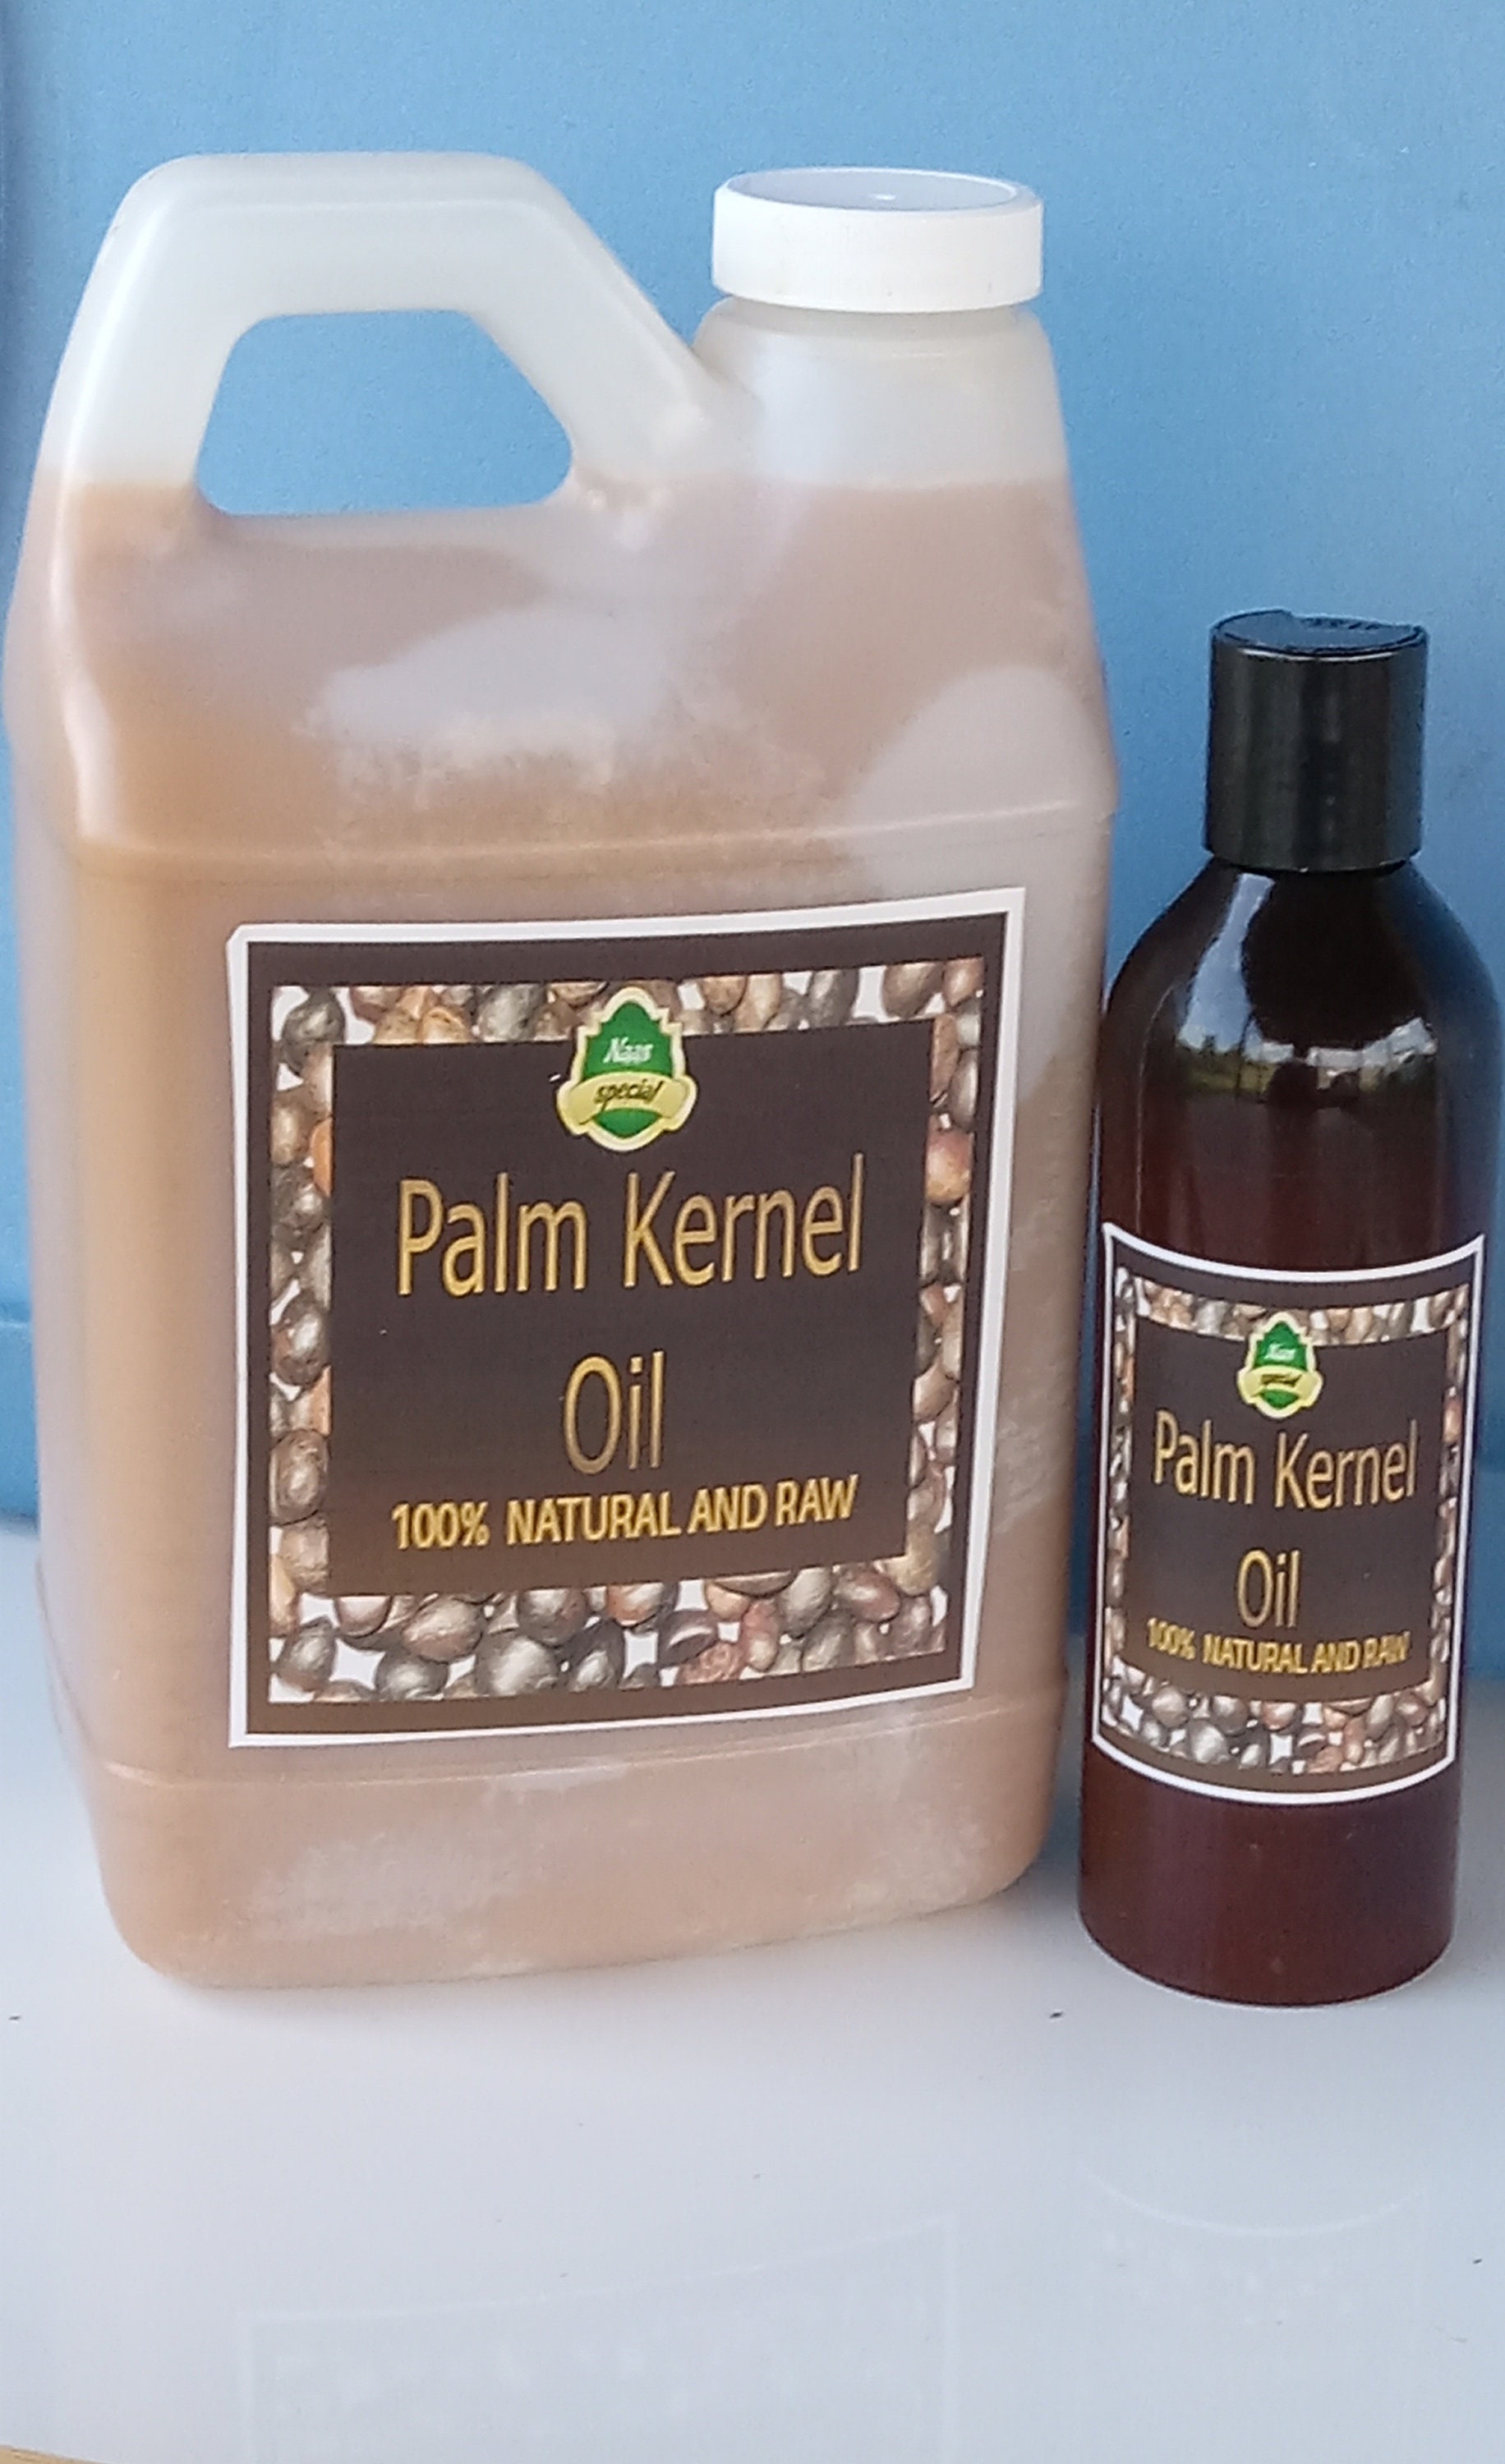 Palm Kernel Oil 100% Natural Oil and Edible From West Africa. 